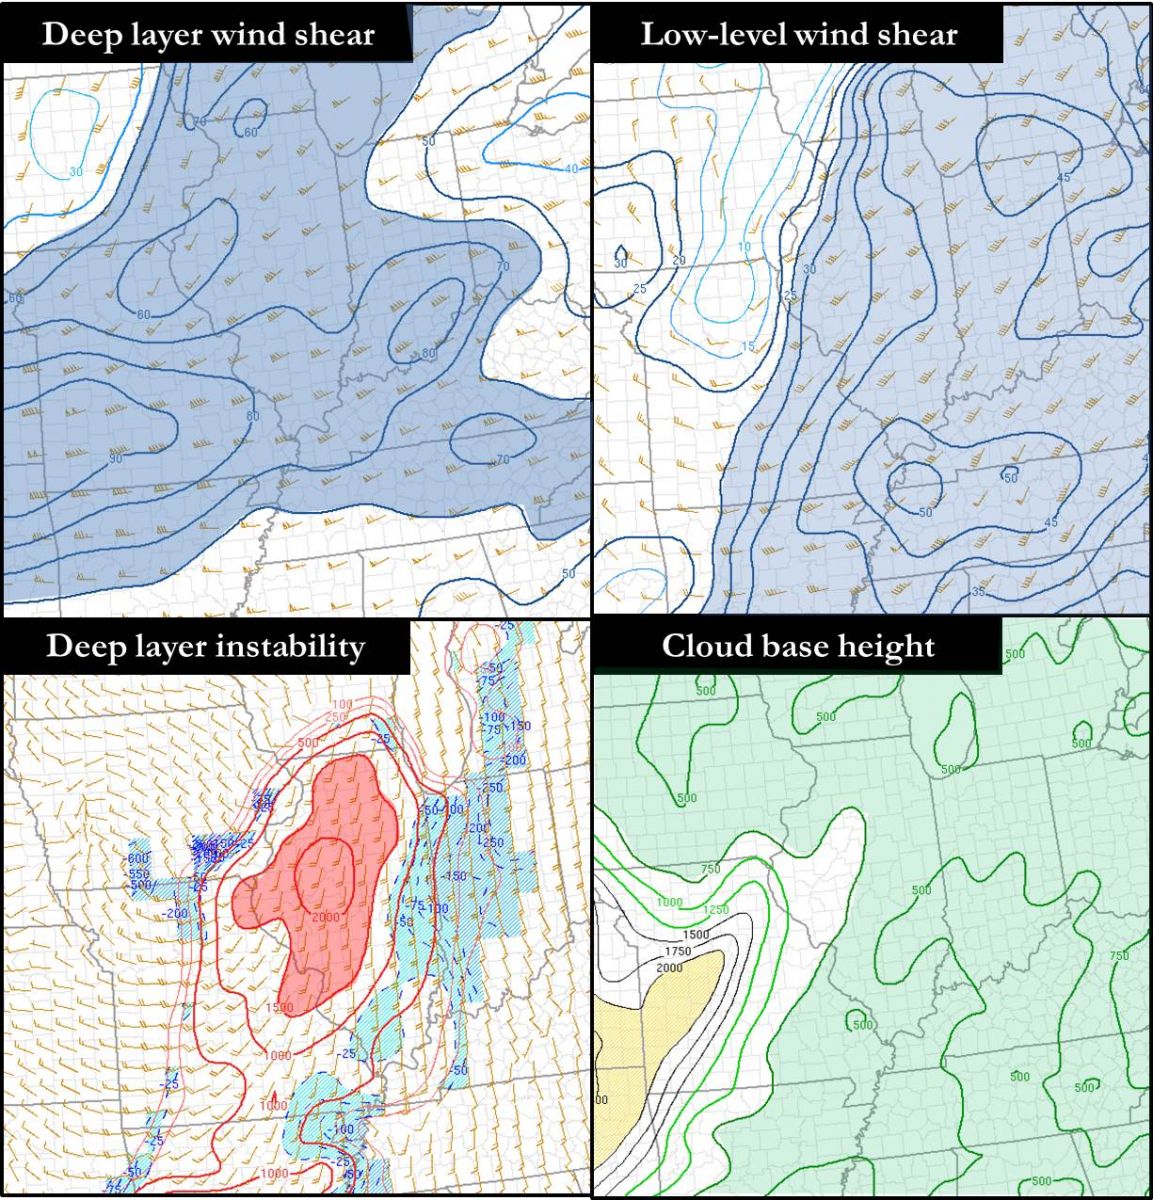 Image showing maps of wind shear, instability, and cloud bases on November 17 2013